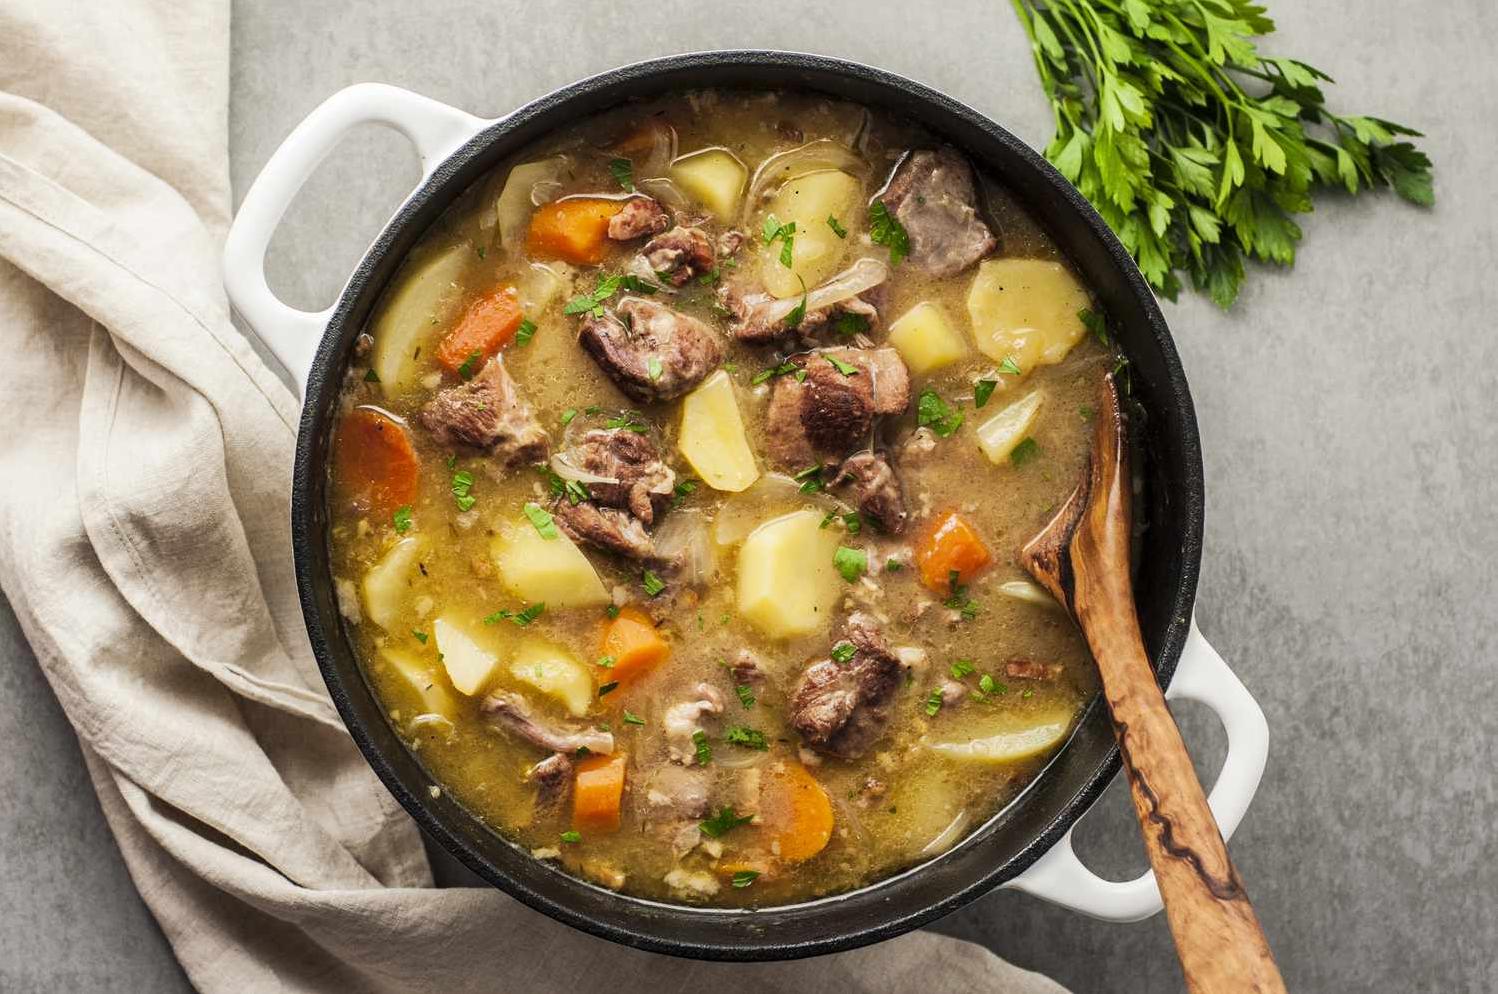  A warm and hearty Irish Lamb Stew to tantalize your taste buds